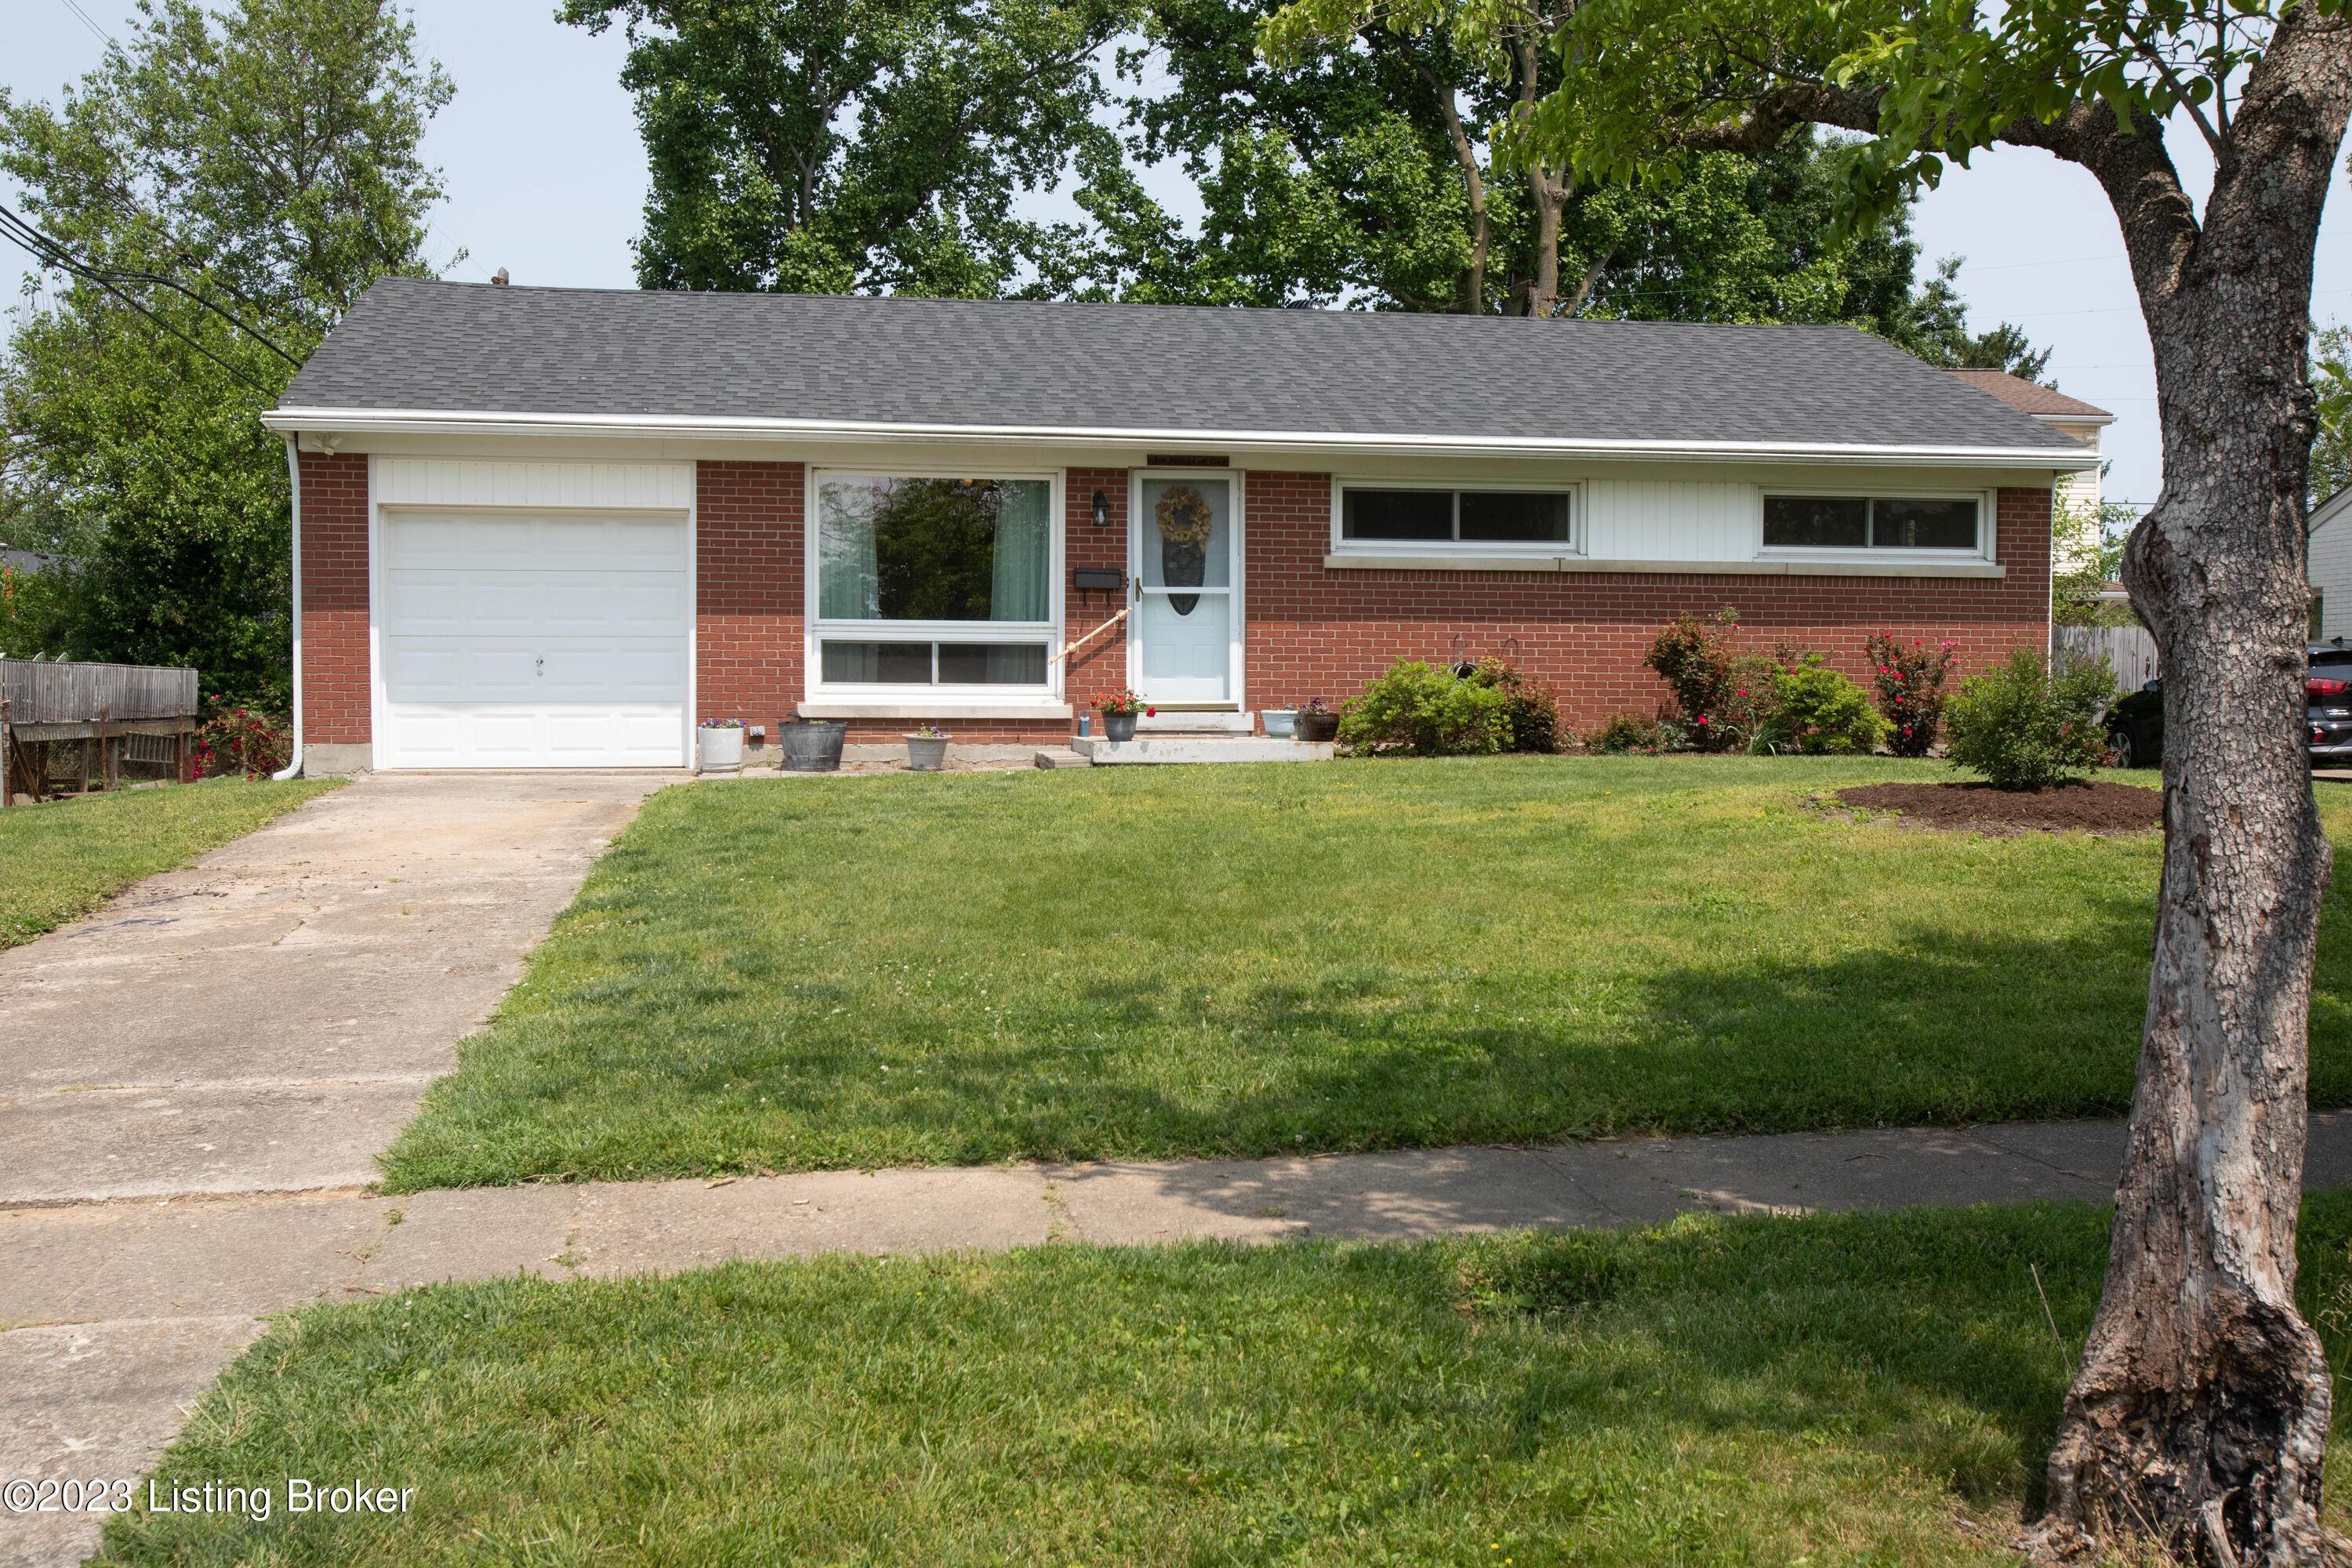 37. Single Family at Louisville, KY 40223